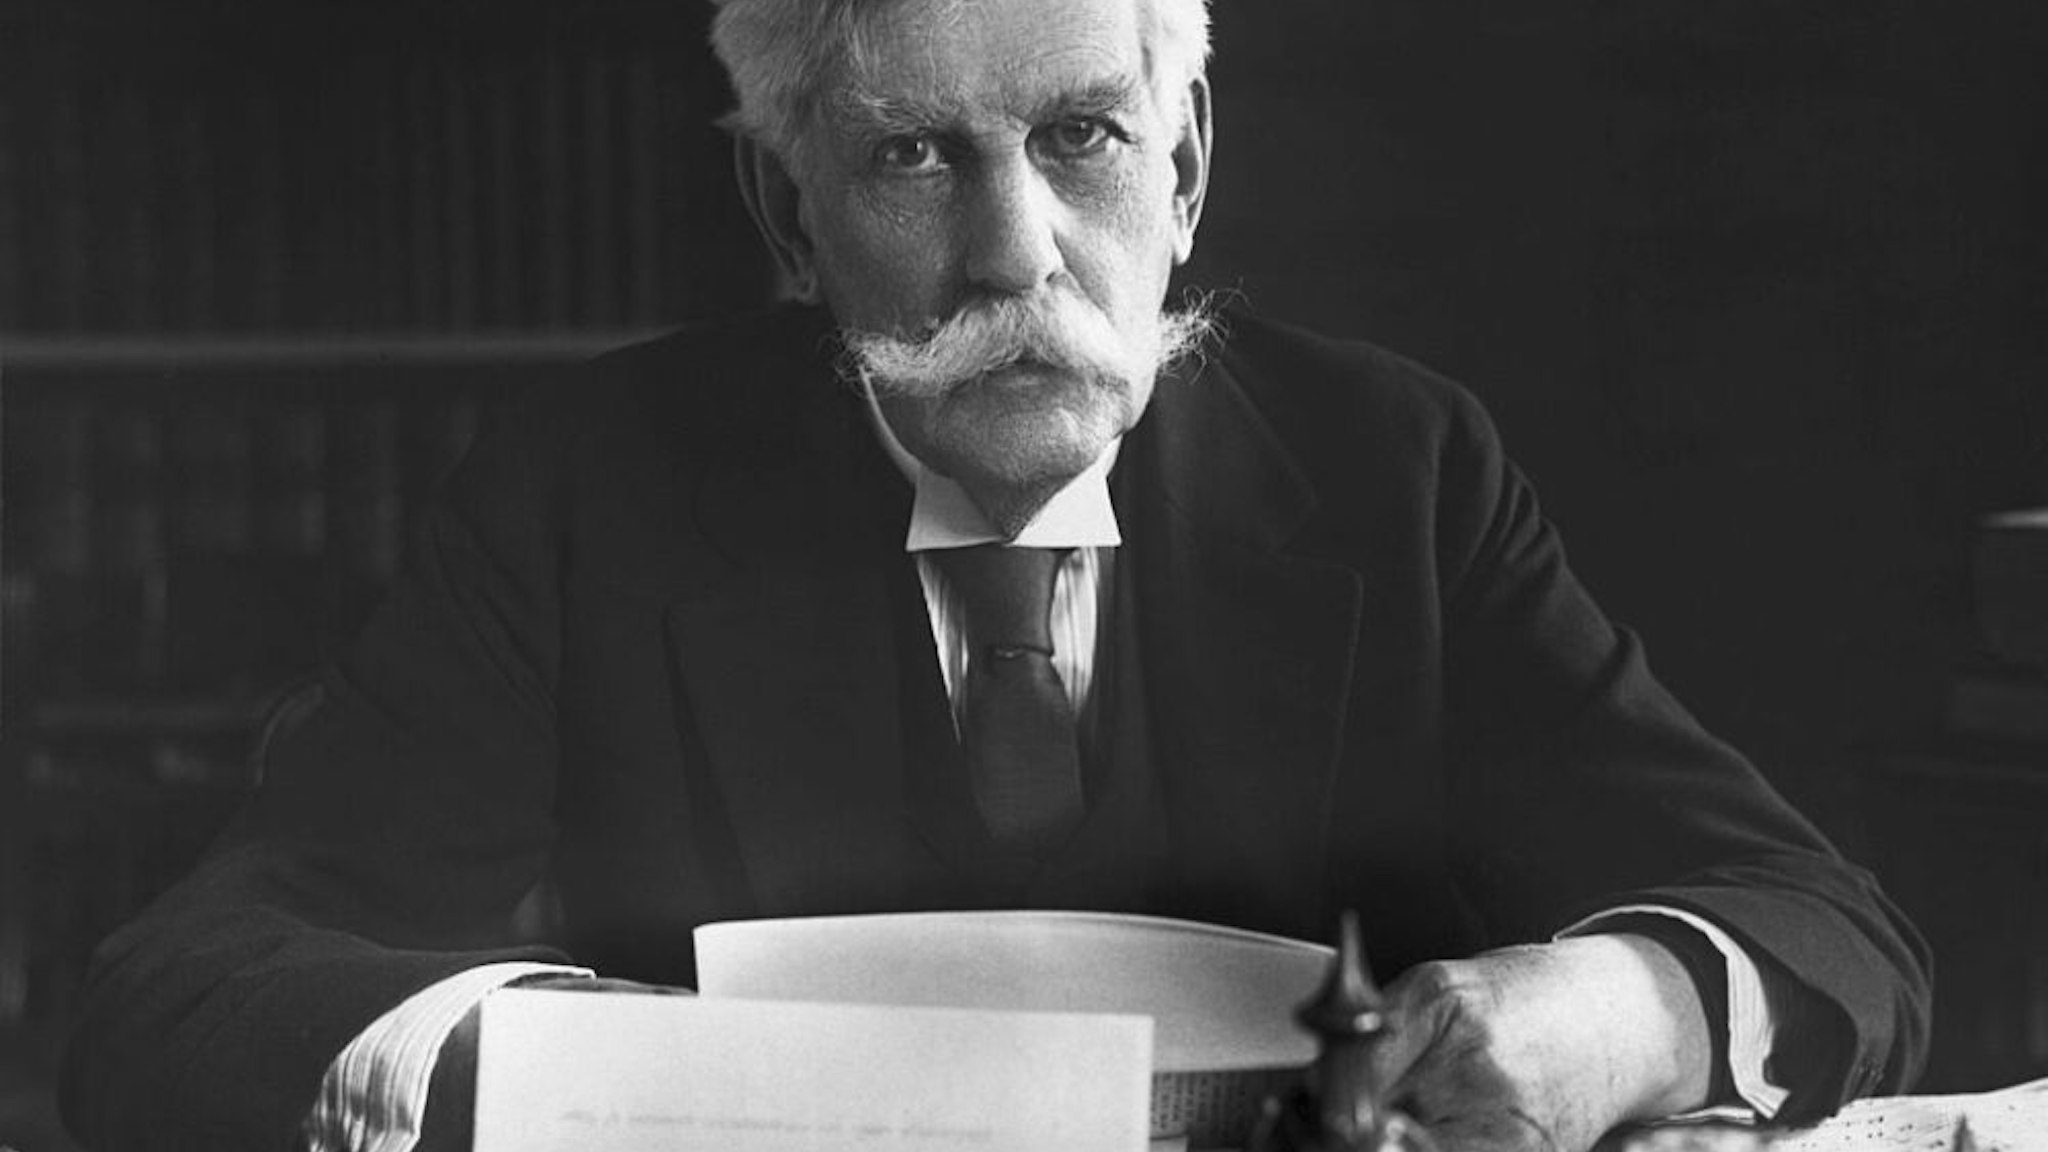 Oliver Wendell Holmes (1841-1935), Associate Justice of the Supreme Court, is shown seated at his desk.